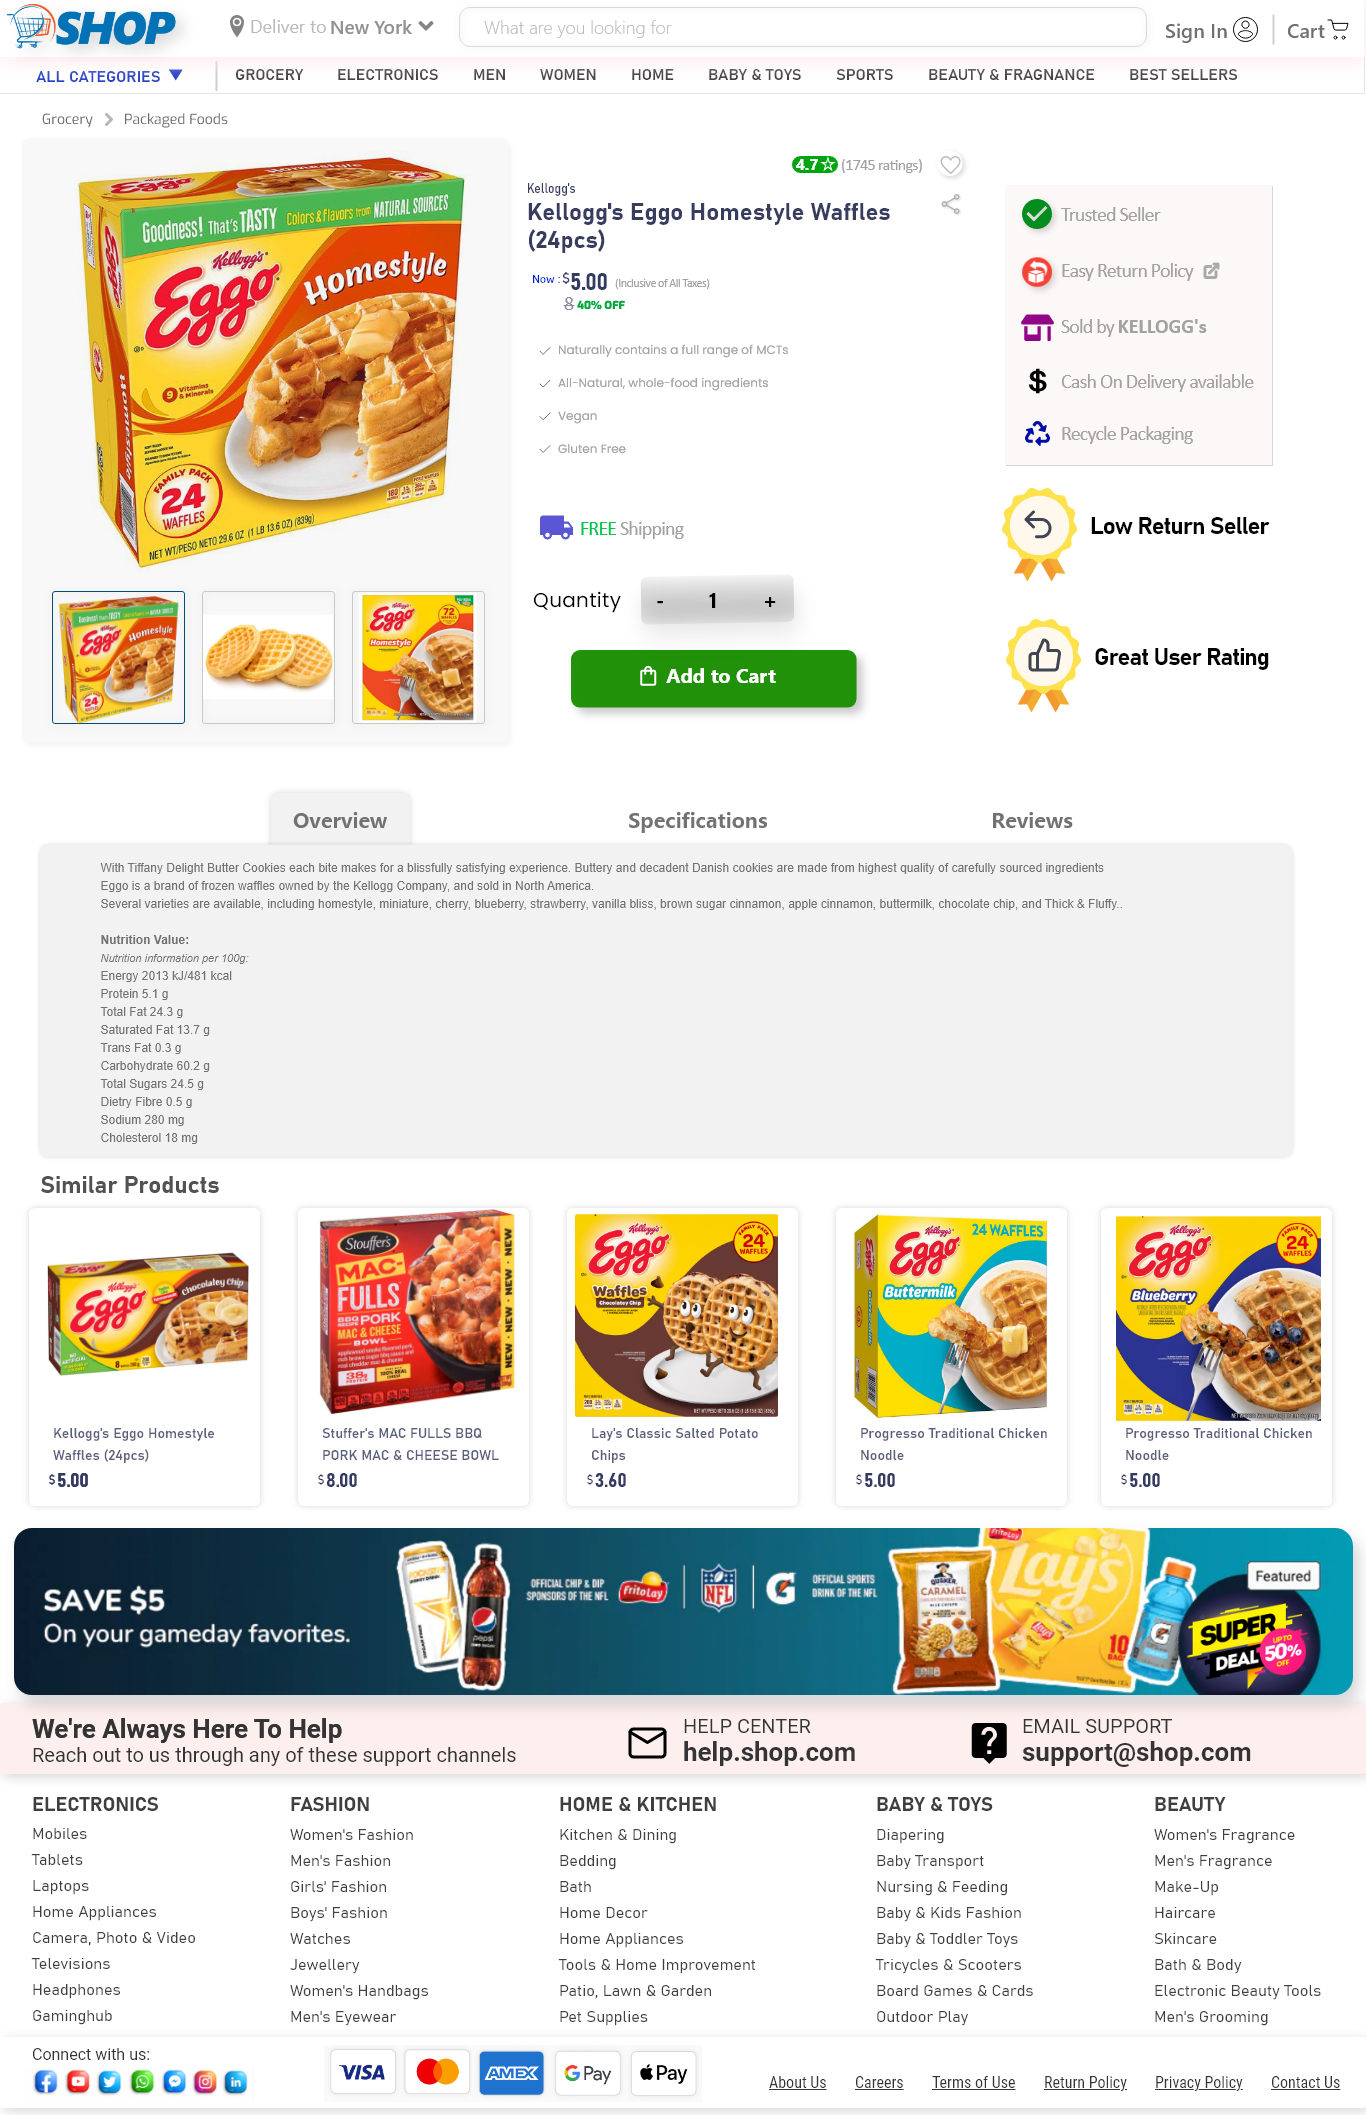 Single Product Page